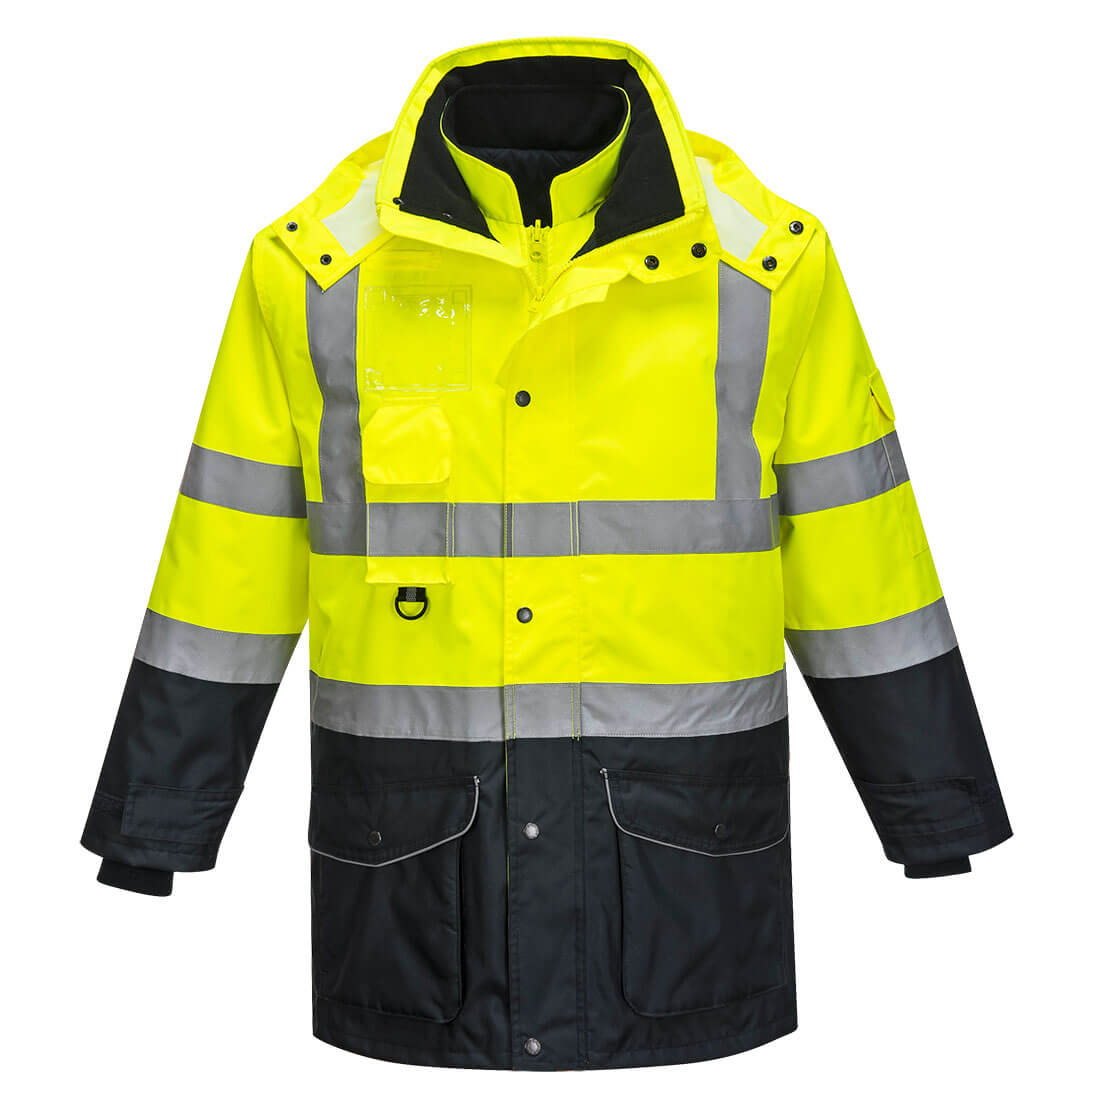 Image of Oxford Weave 300D Class 3 Hi Vis 7-in-1 Contrast Traffic Jacket Yellow / Navy XL